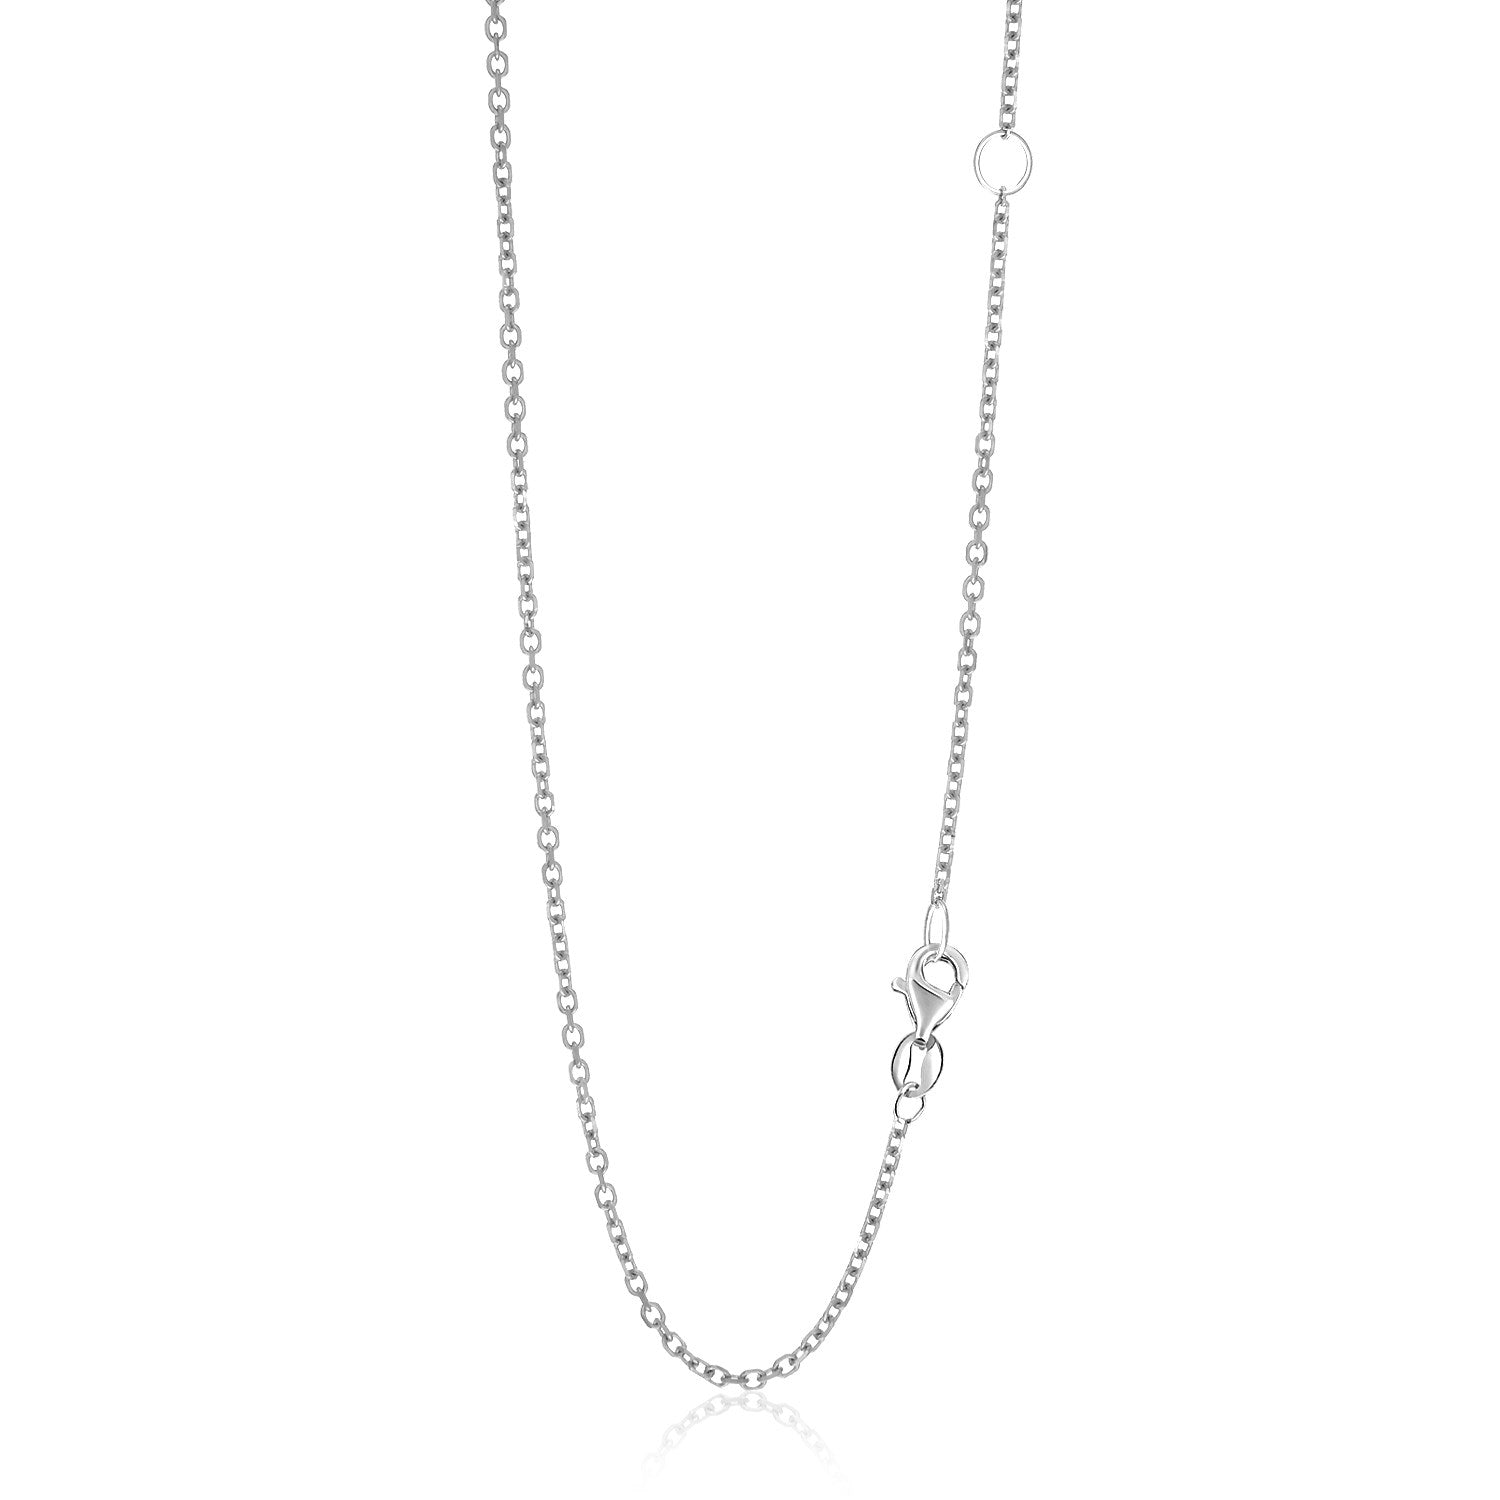 14k White Gold Adjustable Cable Chain 1.5mm